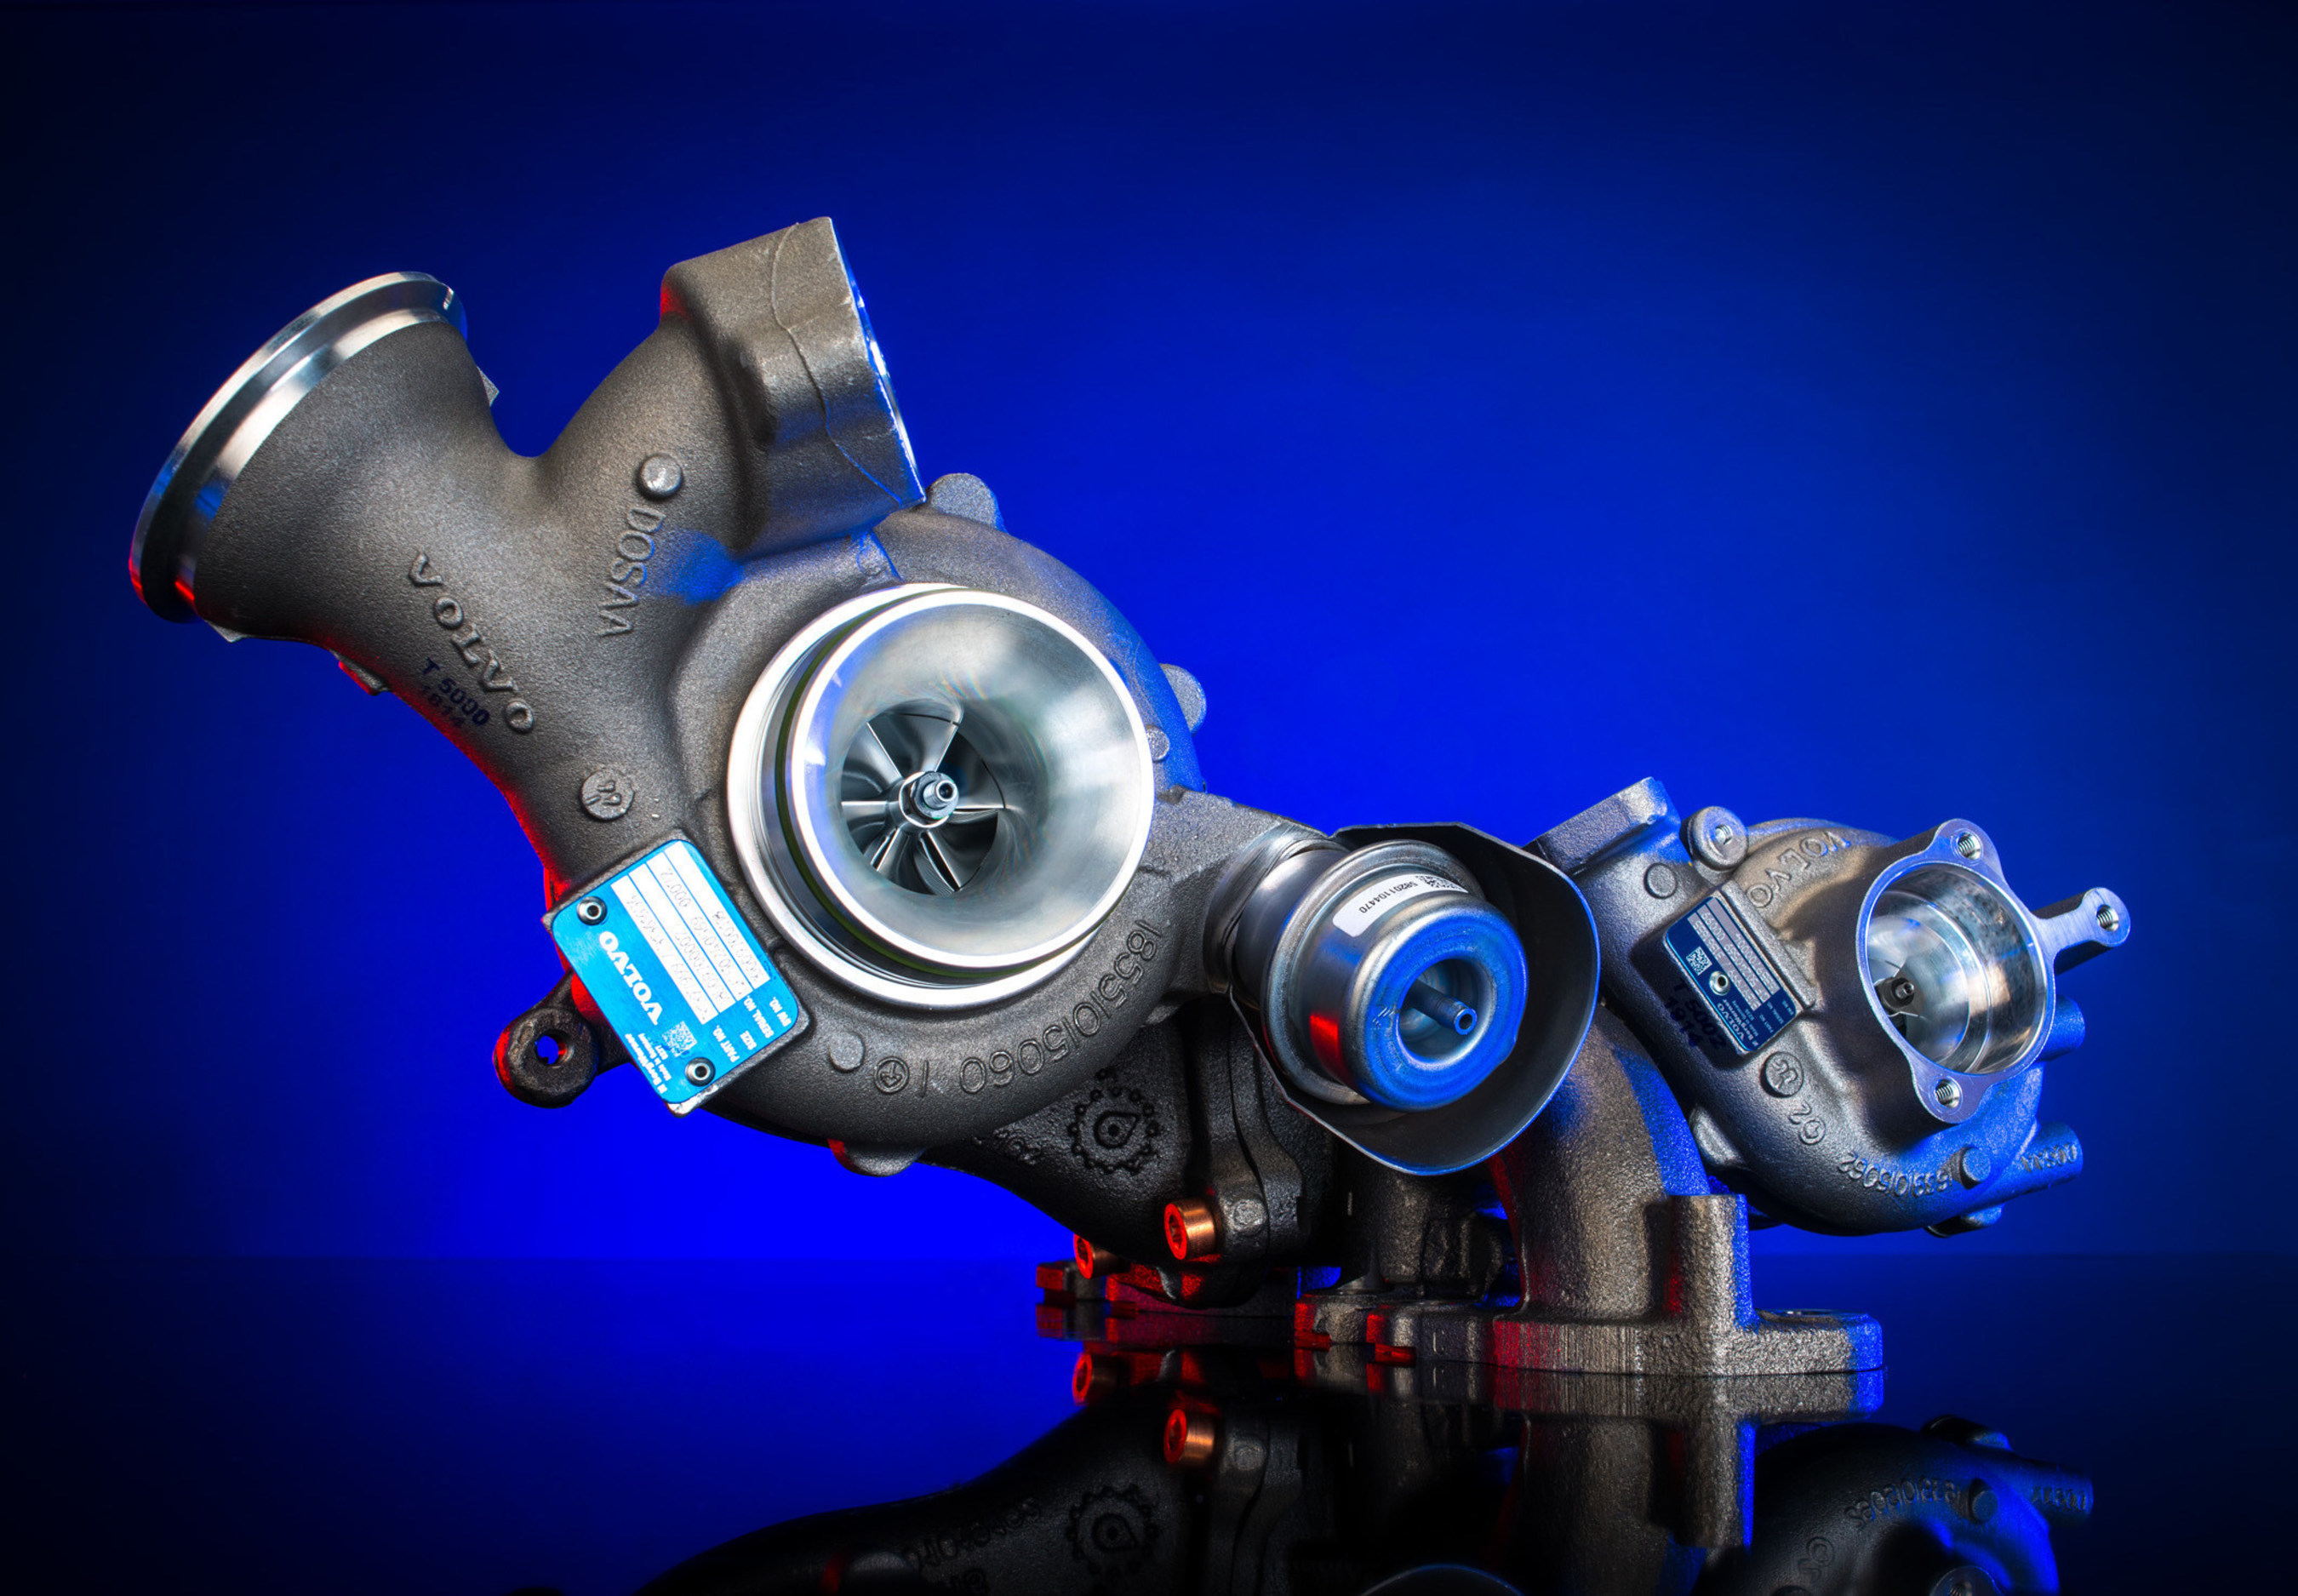 BorgWarner's R2S(R) turbocharging technology improves fuel economy and reduces emissions for Volvo's new 2.0-liter diesel engine.